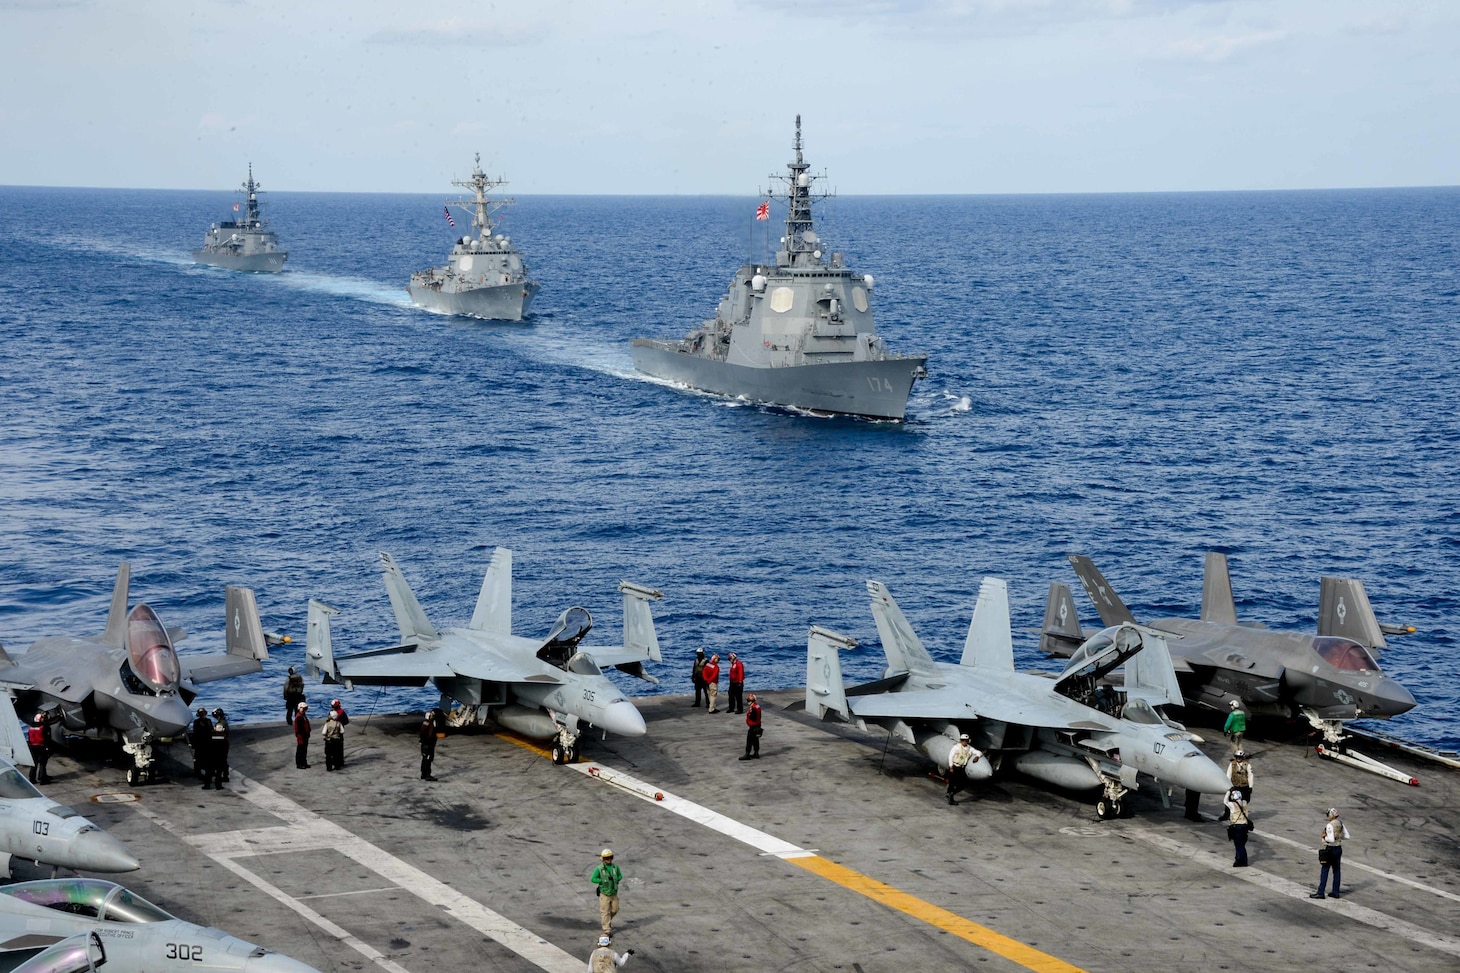 PHILIPPINE SEA (Nov. 21, 2021) Japan Maritime Self-Defense Force (JMSDF) Kongo-class guided-missile destroyer JS Kirishima (DDG 174), U.S. Arleigh Burke-class guided-missile destroyer USS Stockdale (DDG 106) and JMSDF Takanami-class destroyer JS Onami (DD 111) sail alongside Nimitz-Class aircraft carrier USS Carl Vinson (CVN 70) during Annual Exercise (ANNUALEX) 2021. ANNUALEX 2021 is a multilateral exercise conducted by elements of the Royal Australian, Royal Canadian, German, JMSDF and U.S. navies to demonstrate naval inoperability and a joint commitment to a free, open and inclusive Indo-Pacific.(U.S. Navy photo by Mass Communication Specialist Seaman Apprentice Joshua Sapien)